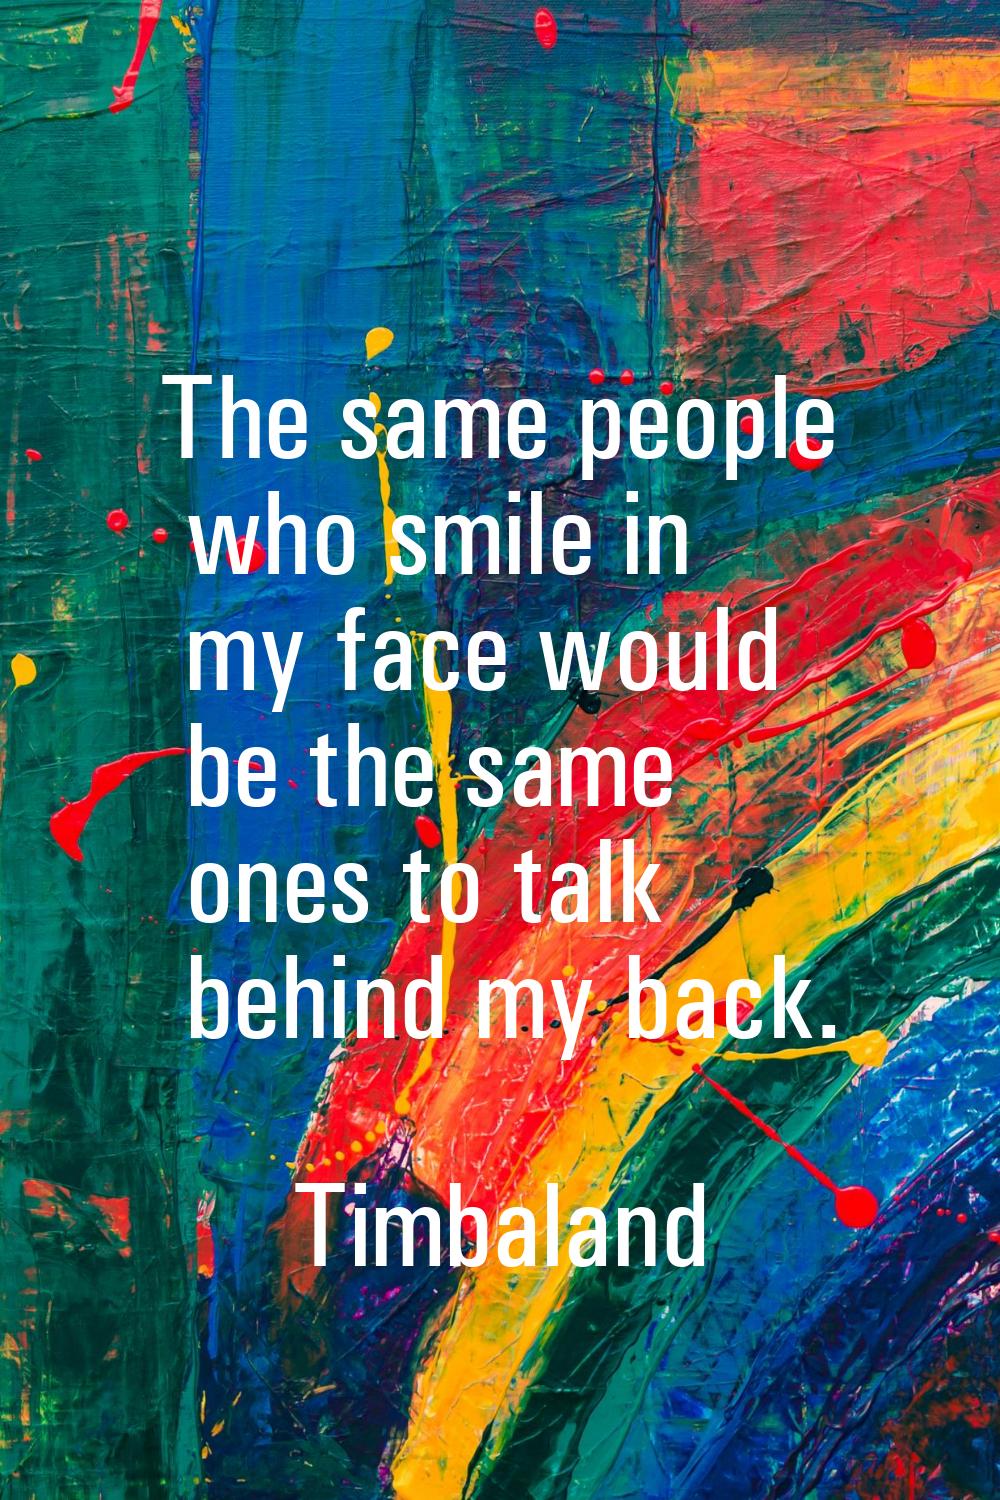 The same people who smile in my face would be the same ones to talk behind my back.